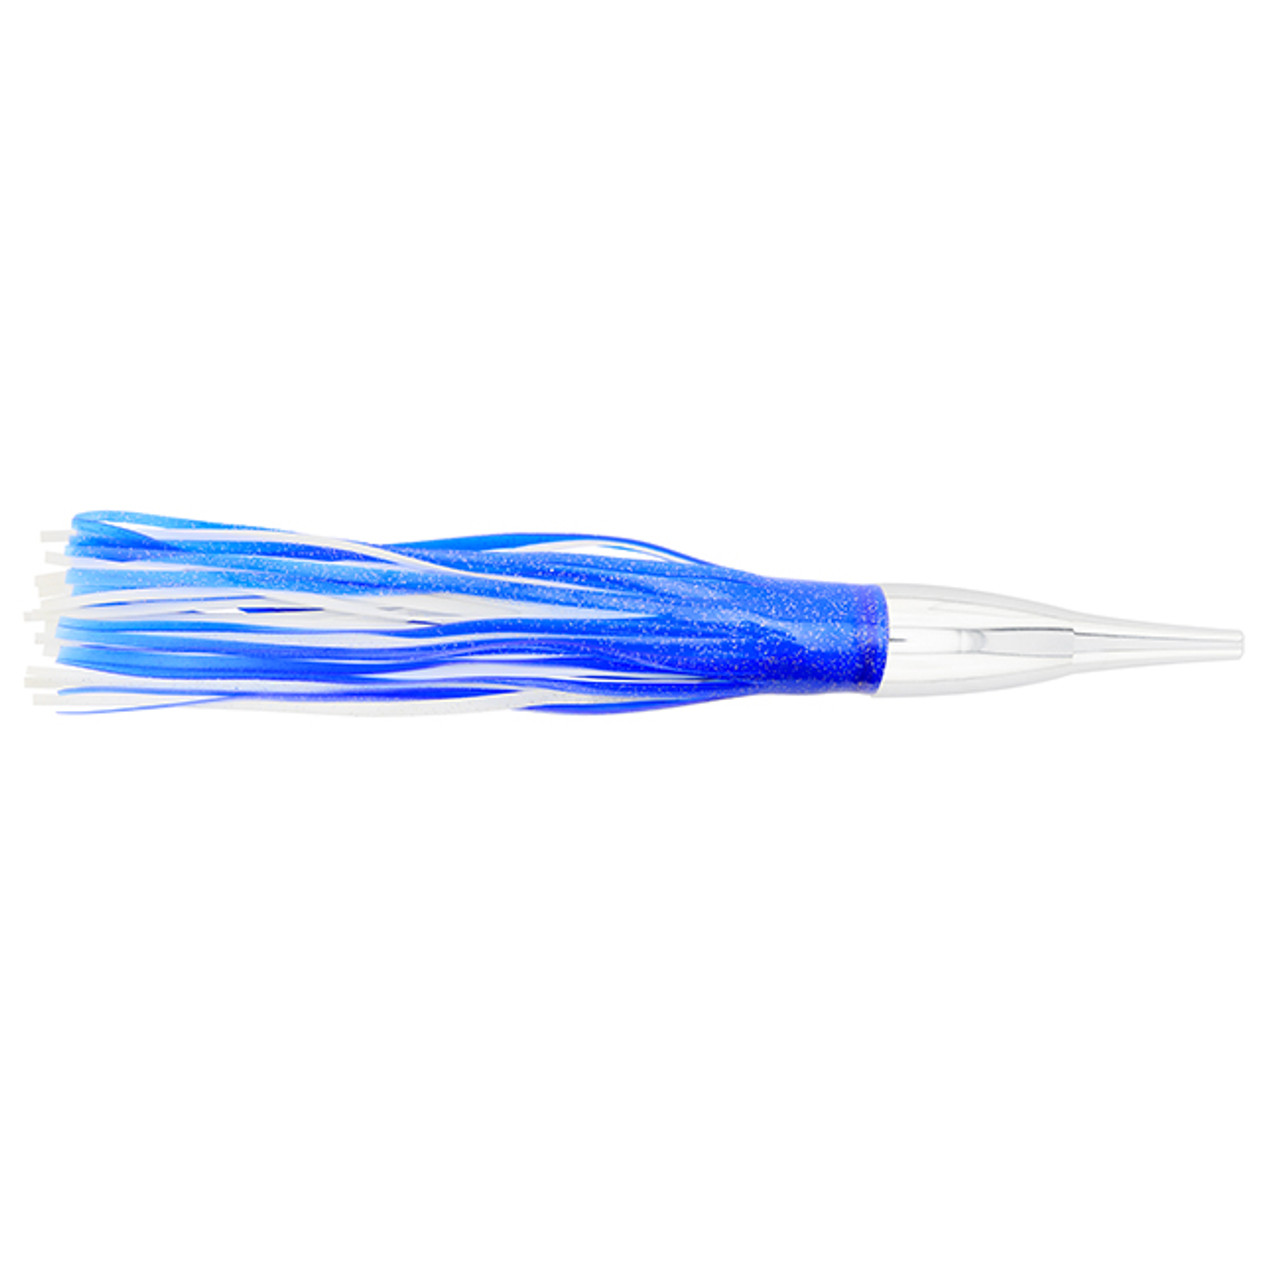 C&H Billy Baits Tuna Witch Ultimate Series - Blue/White